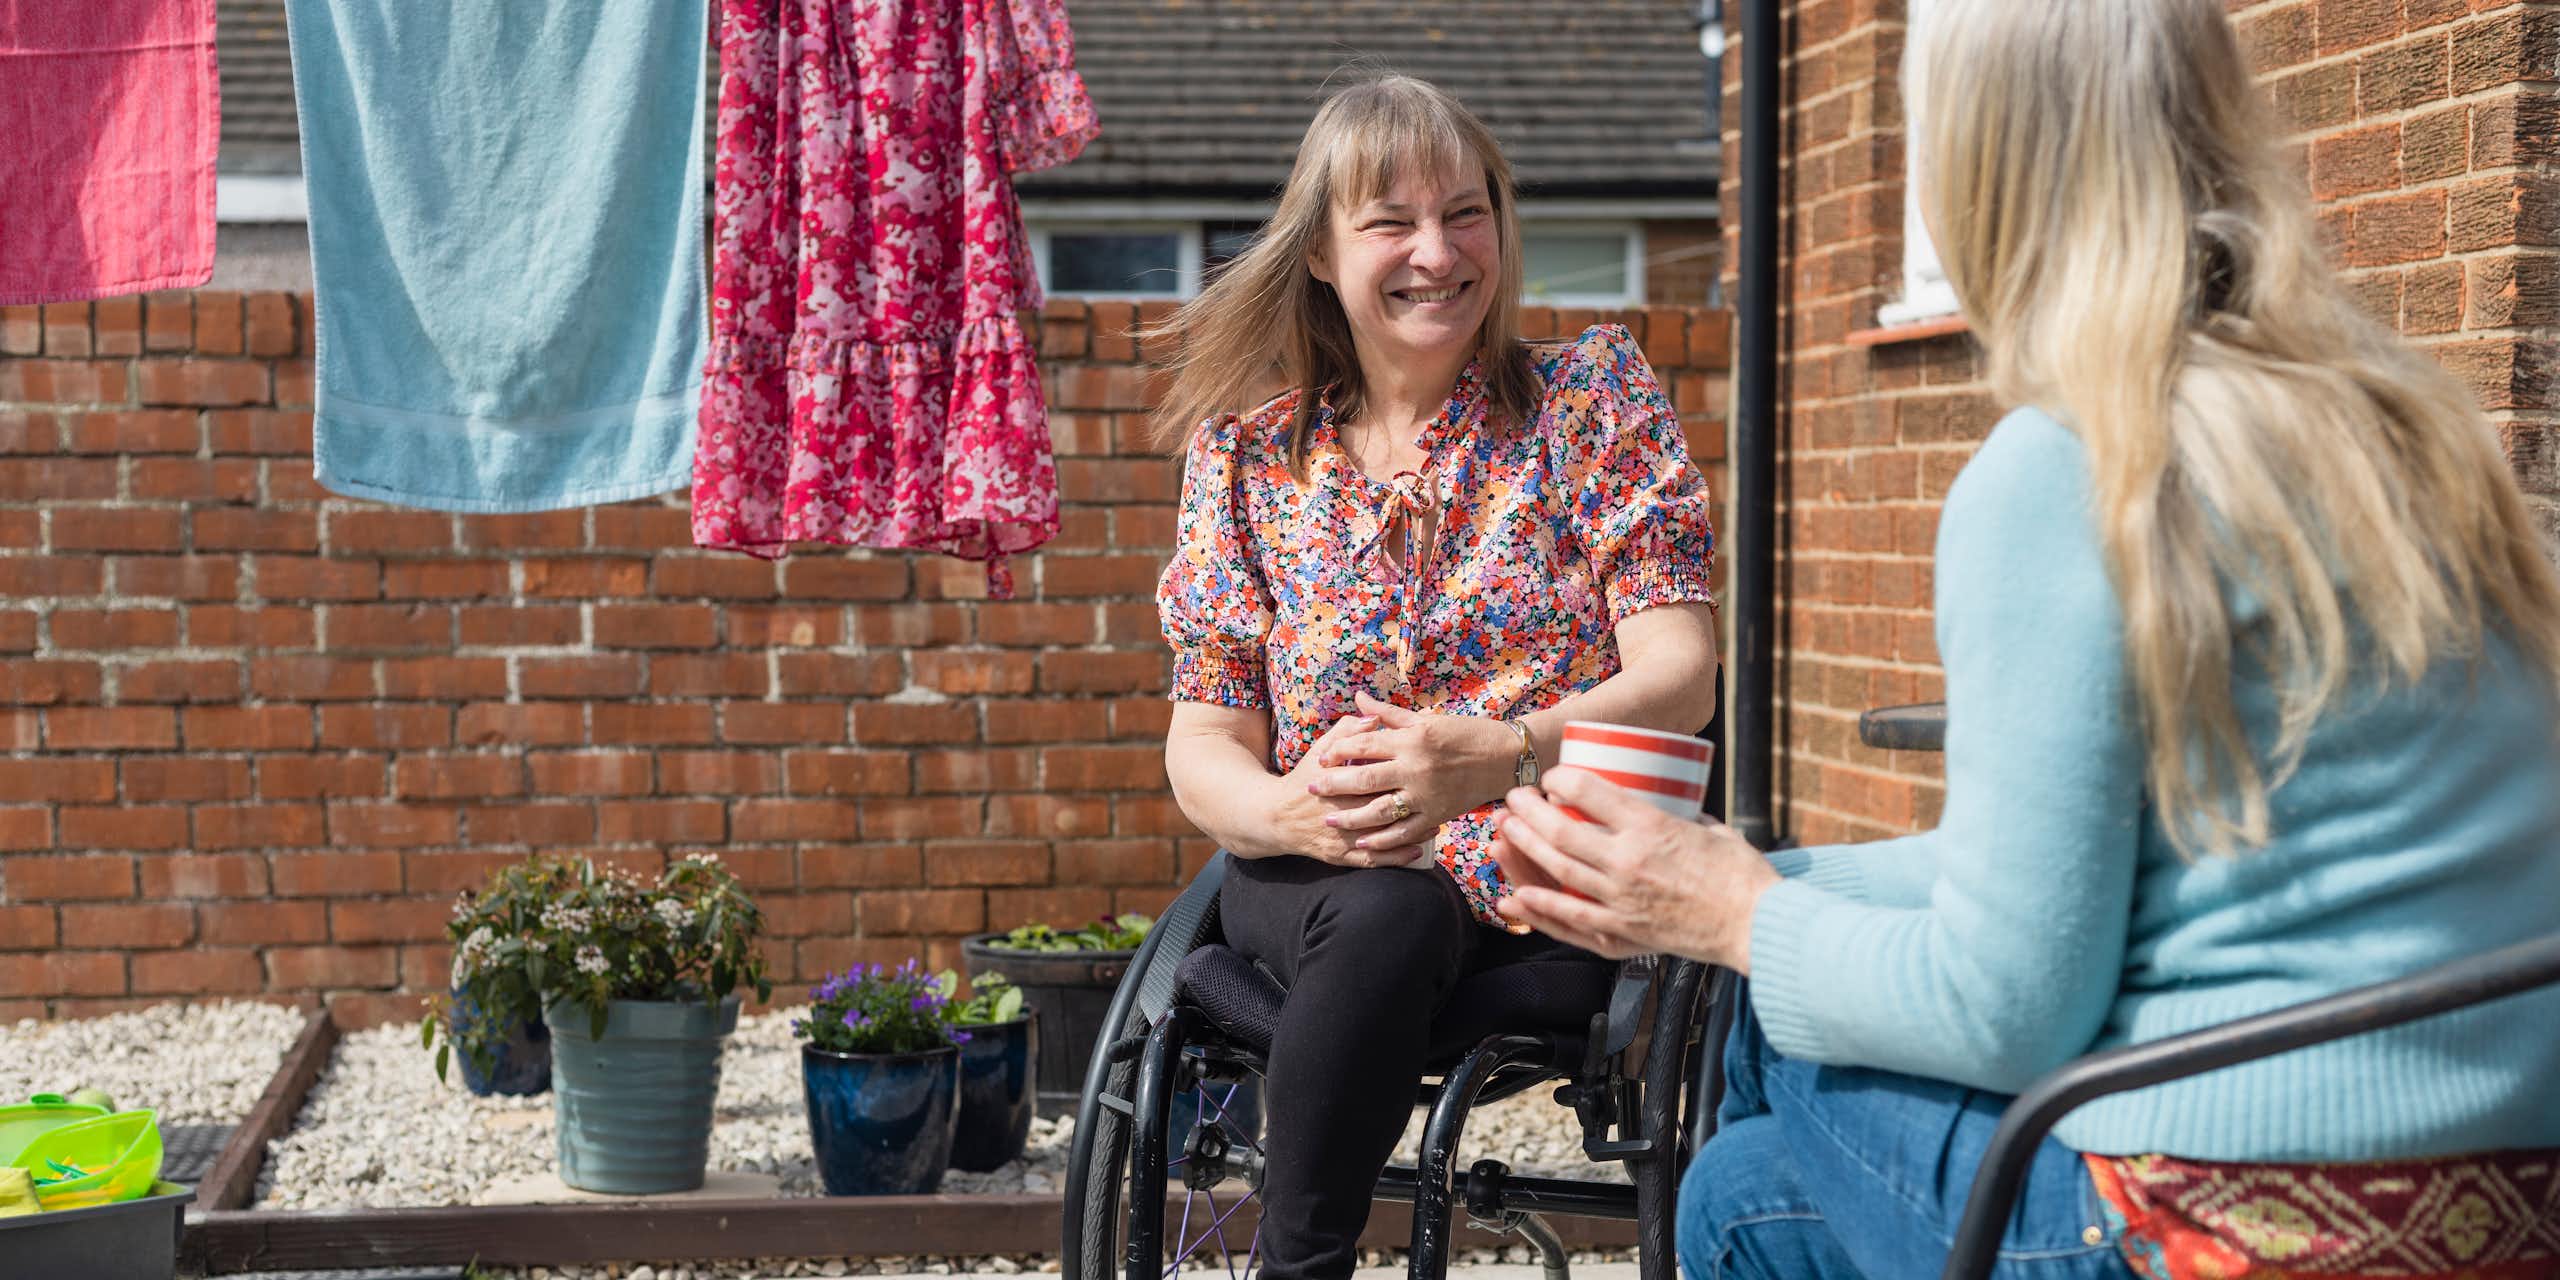 two women talking in home courtyard with washing hanging nearby. One woman using wheelchair